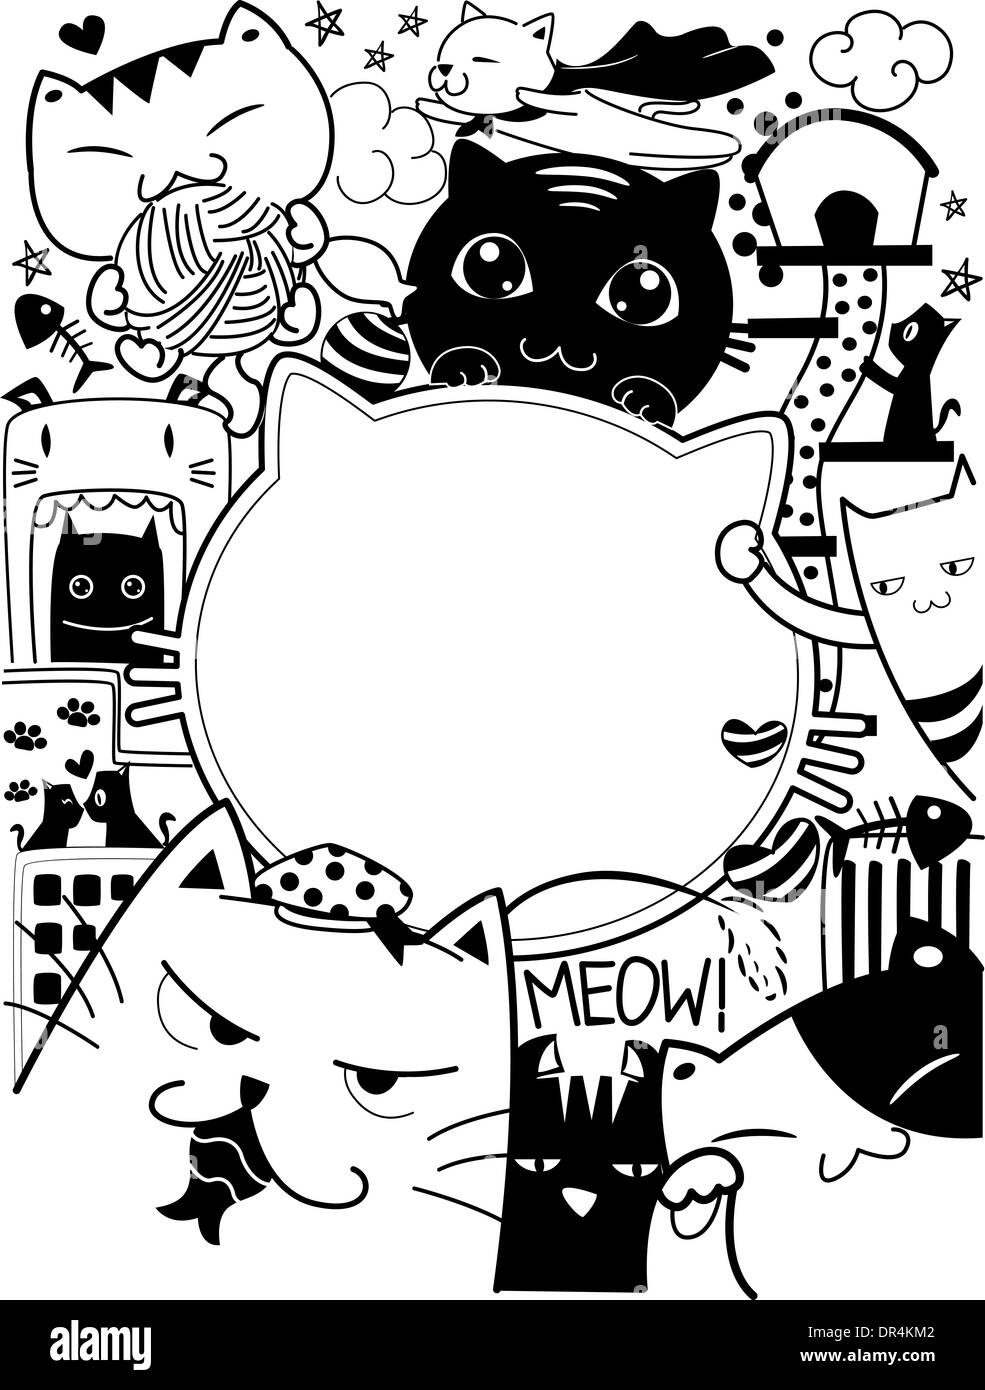 Black and White Doodle Illustration Featuring Cute Cat Antics Stock Photo